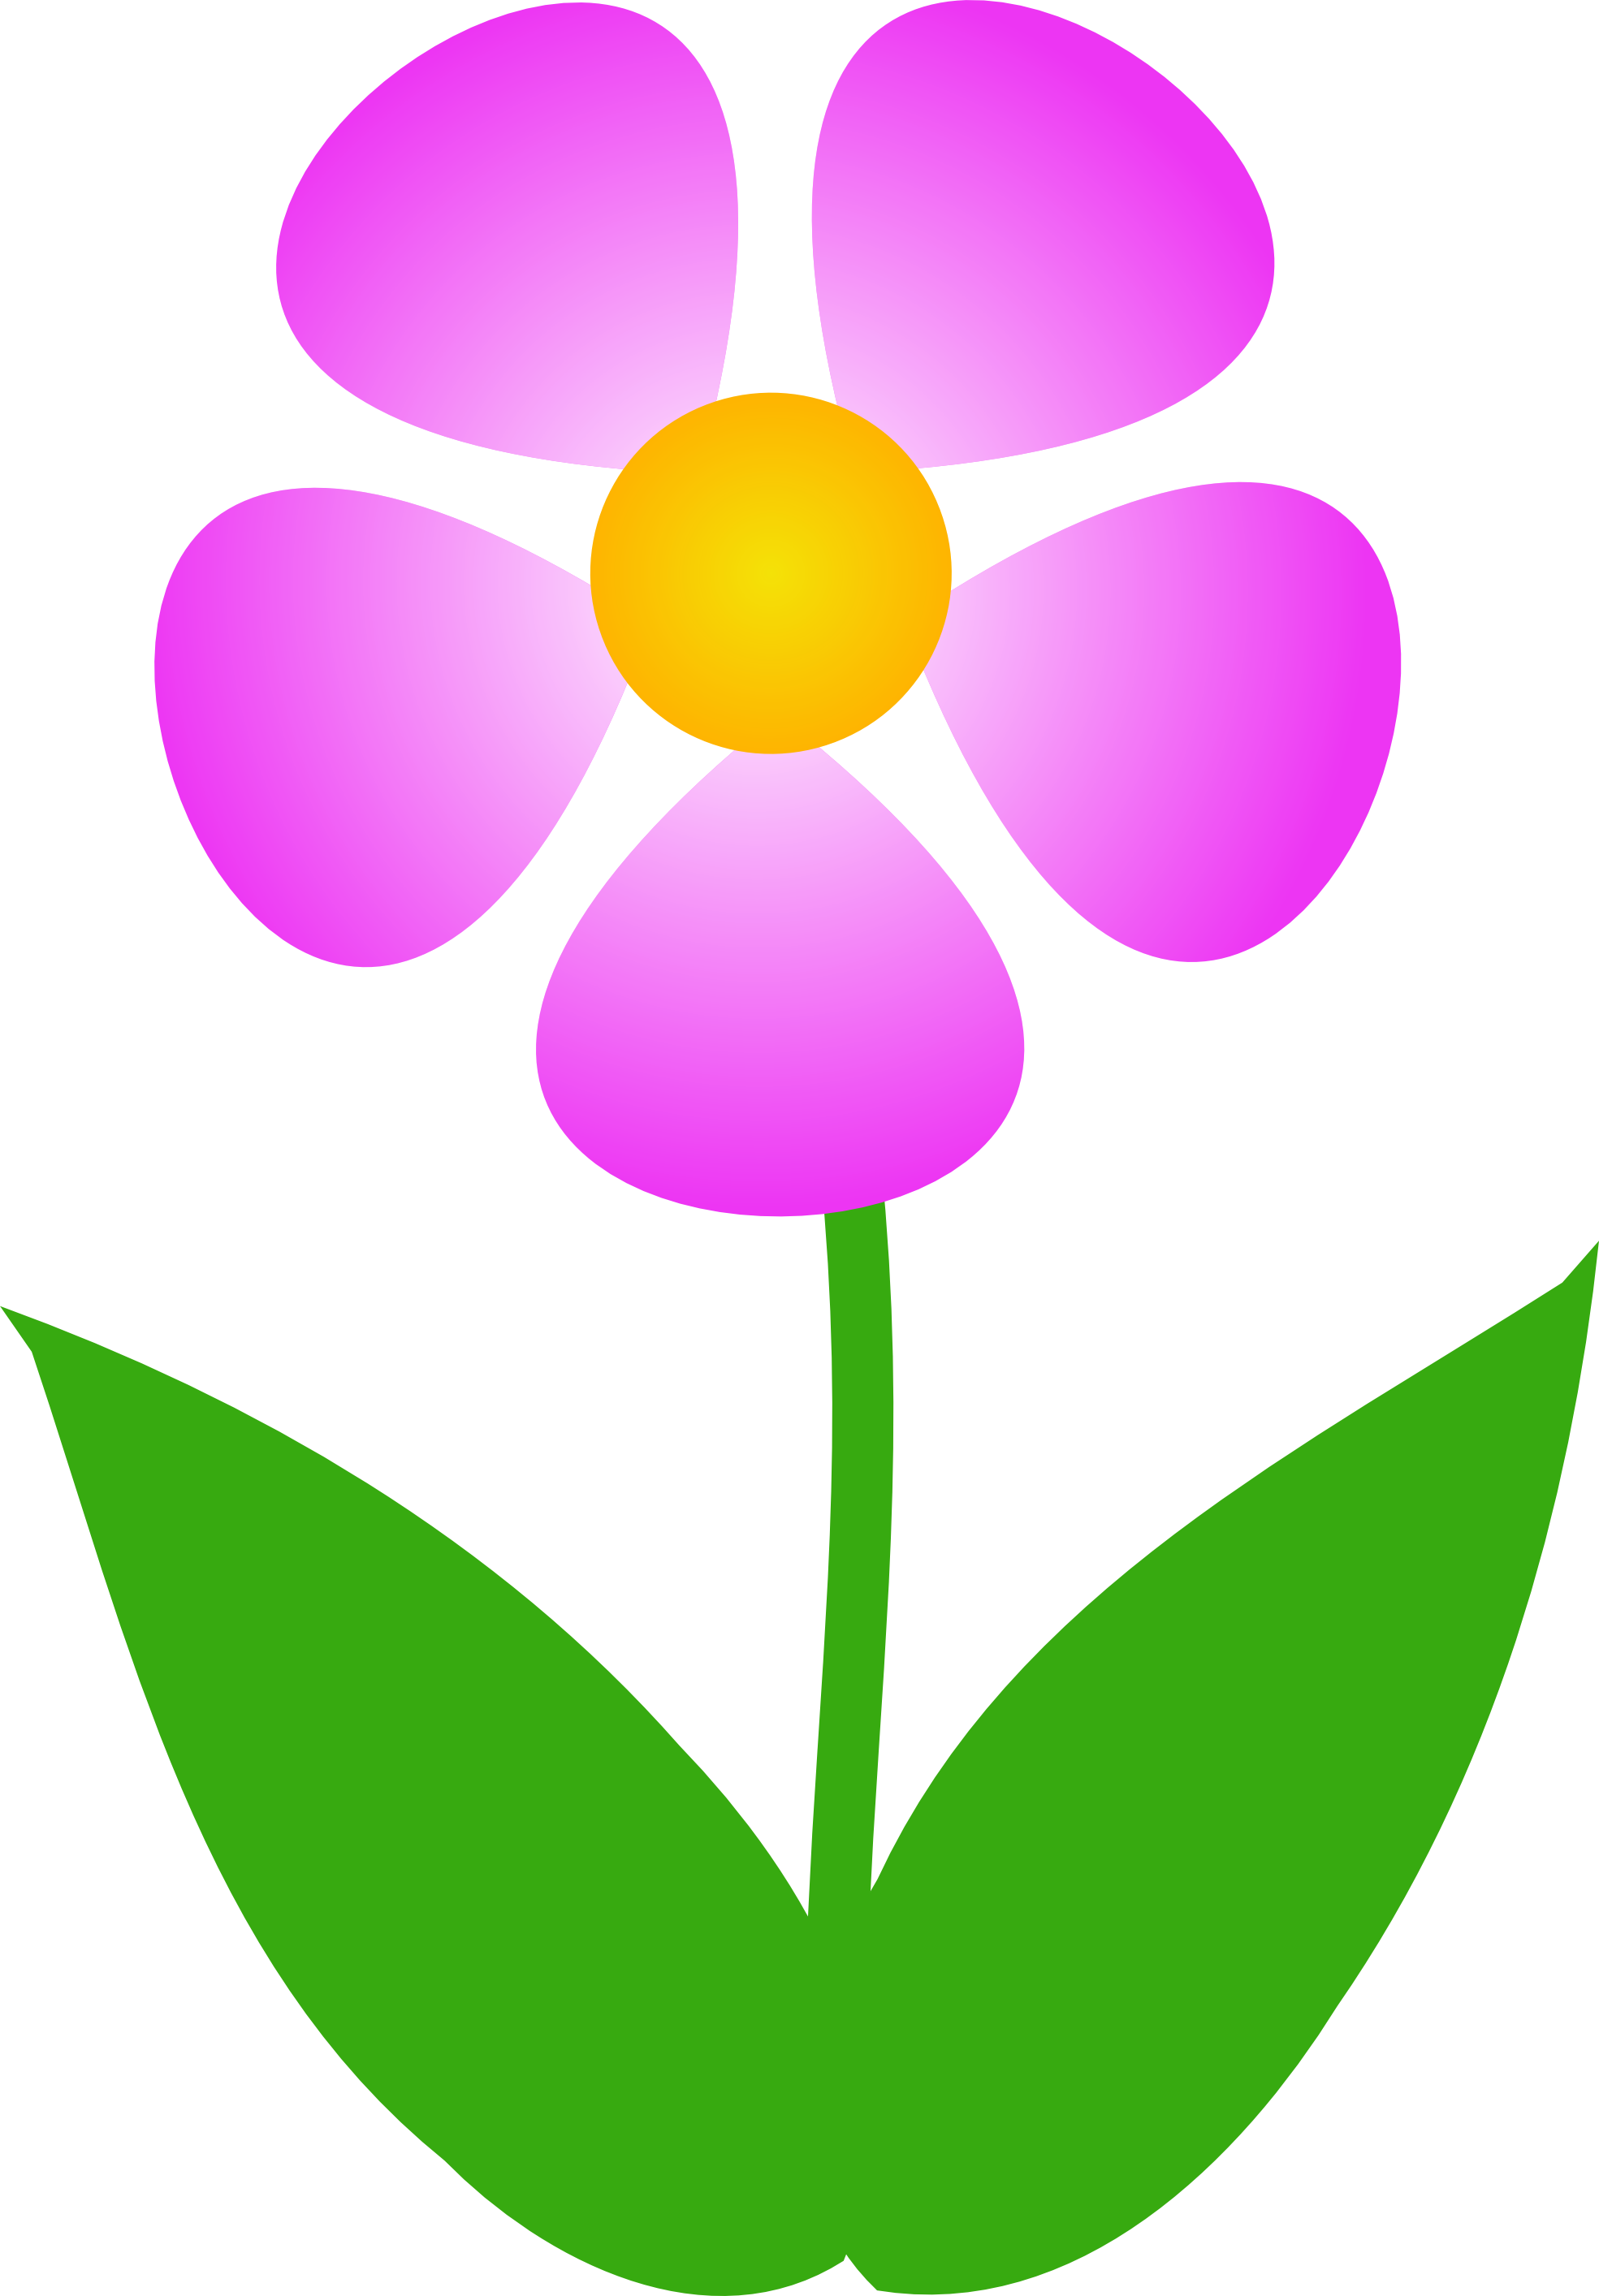 Free clipart image of flowers flower clip art pictures image 1 